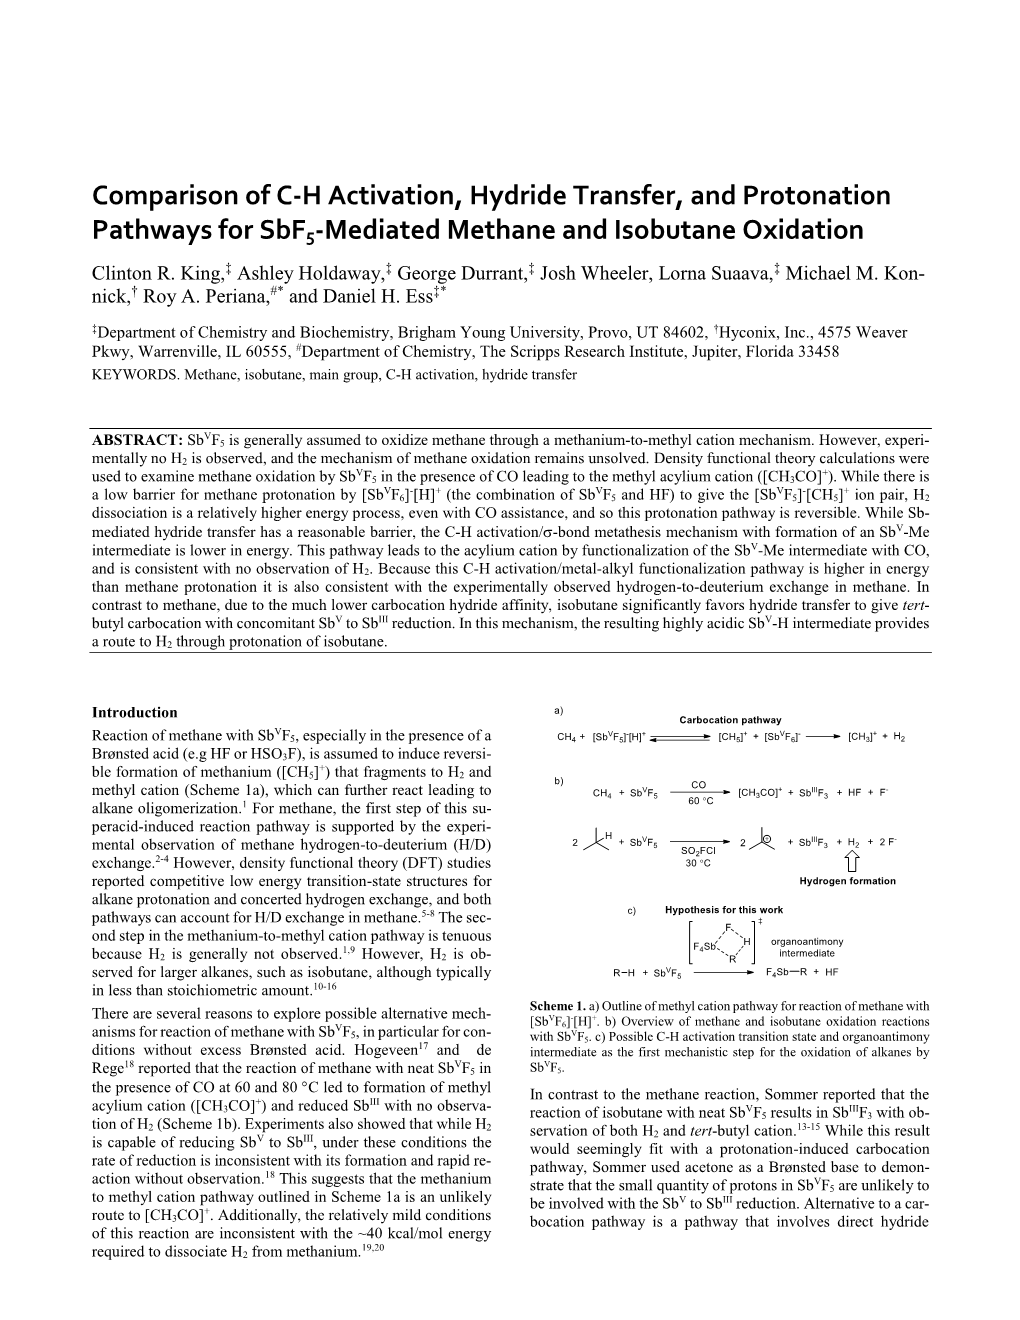 Comparison of CH Activation, Hydride Transfer, and Protonation Pathways